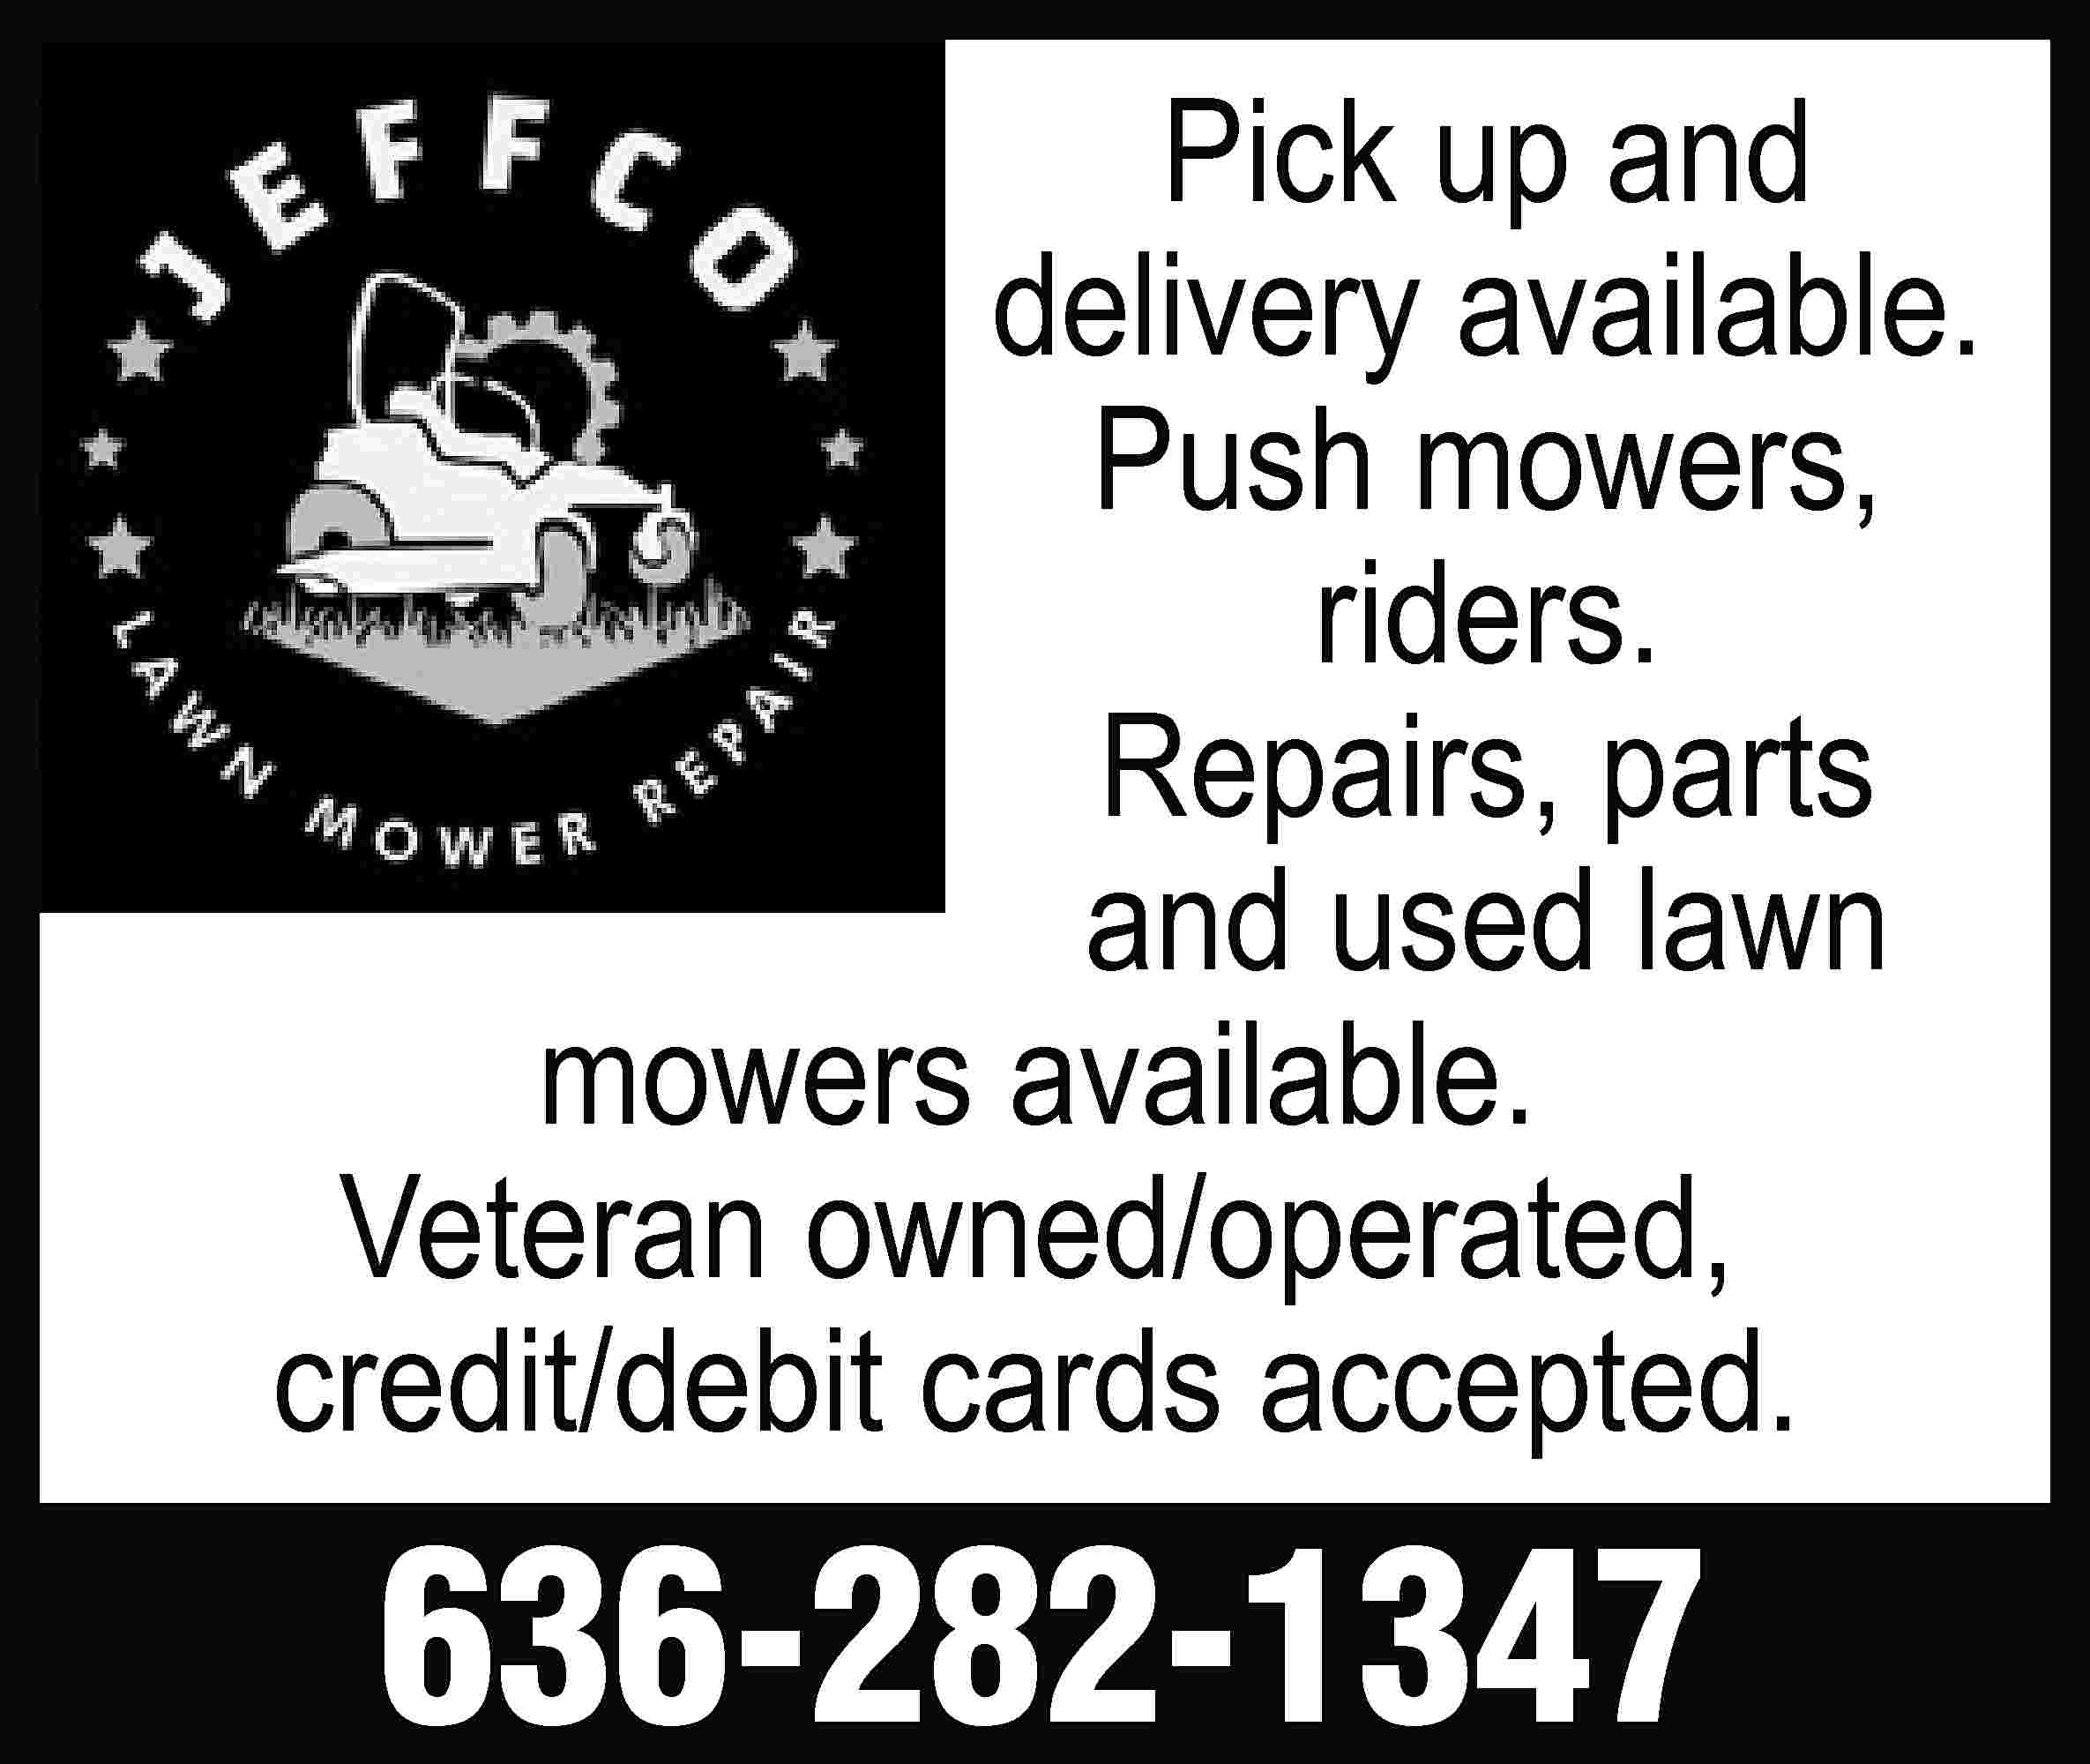 Pick up and delivery available.  Pick up and delivery available. Push mowers, riders. Repairs, parts and used lawn mowers available. Veteran owned/operated, credit/debit cards accepted. 636-282-1347